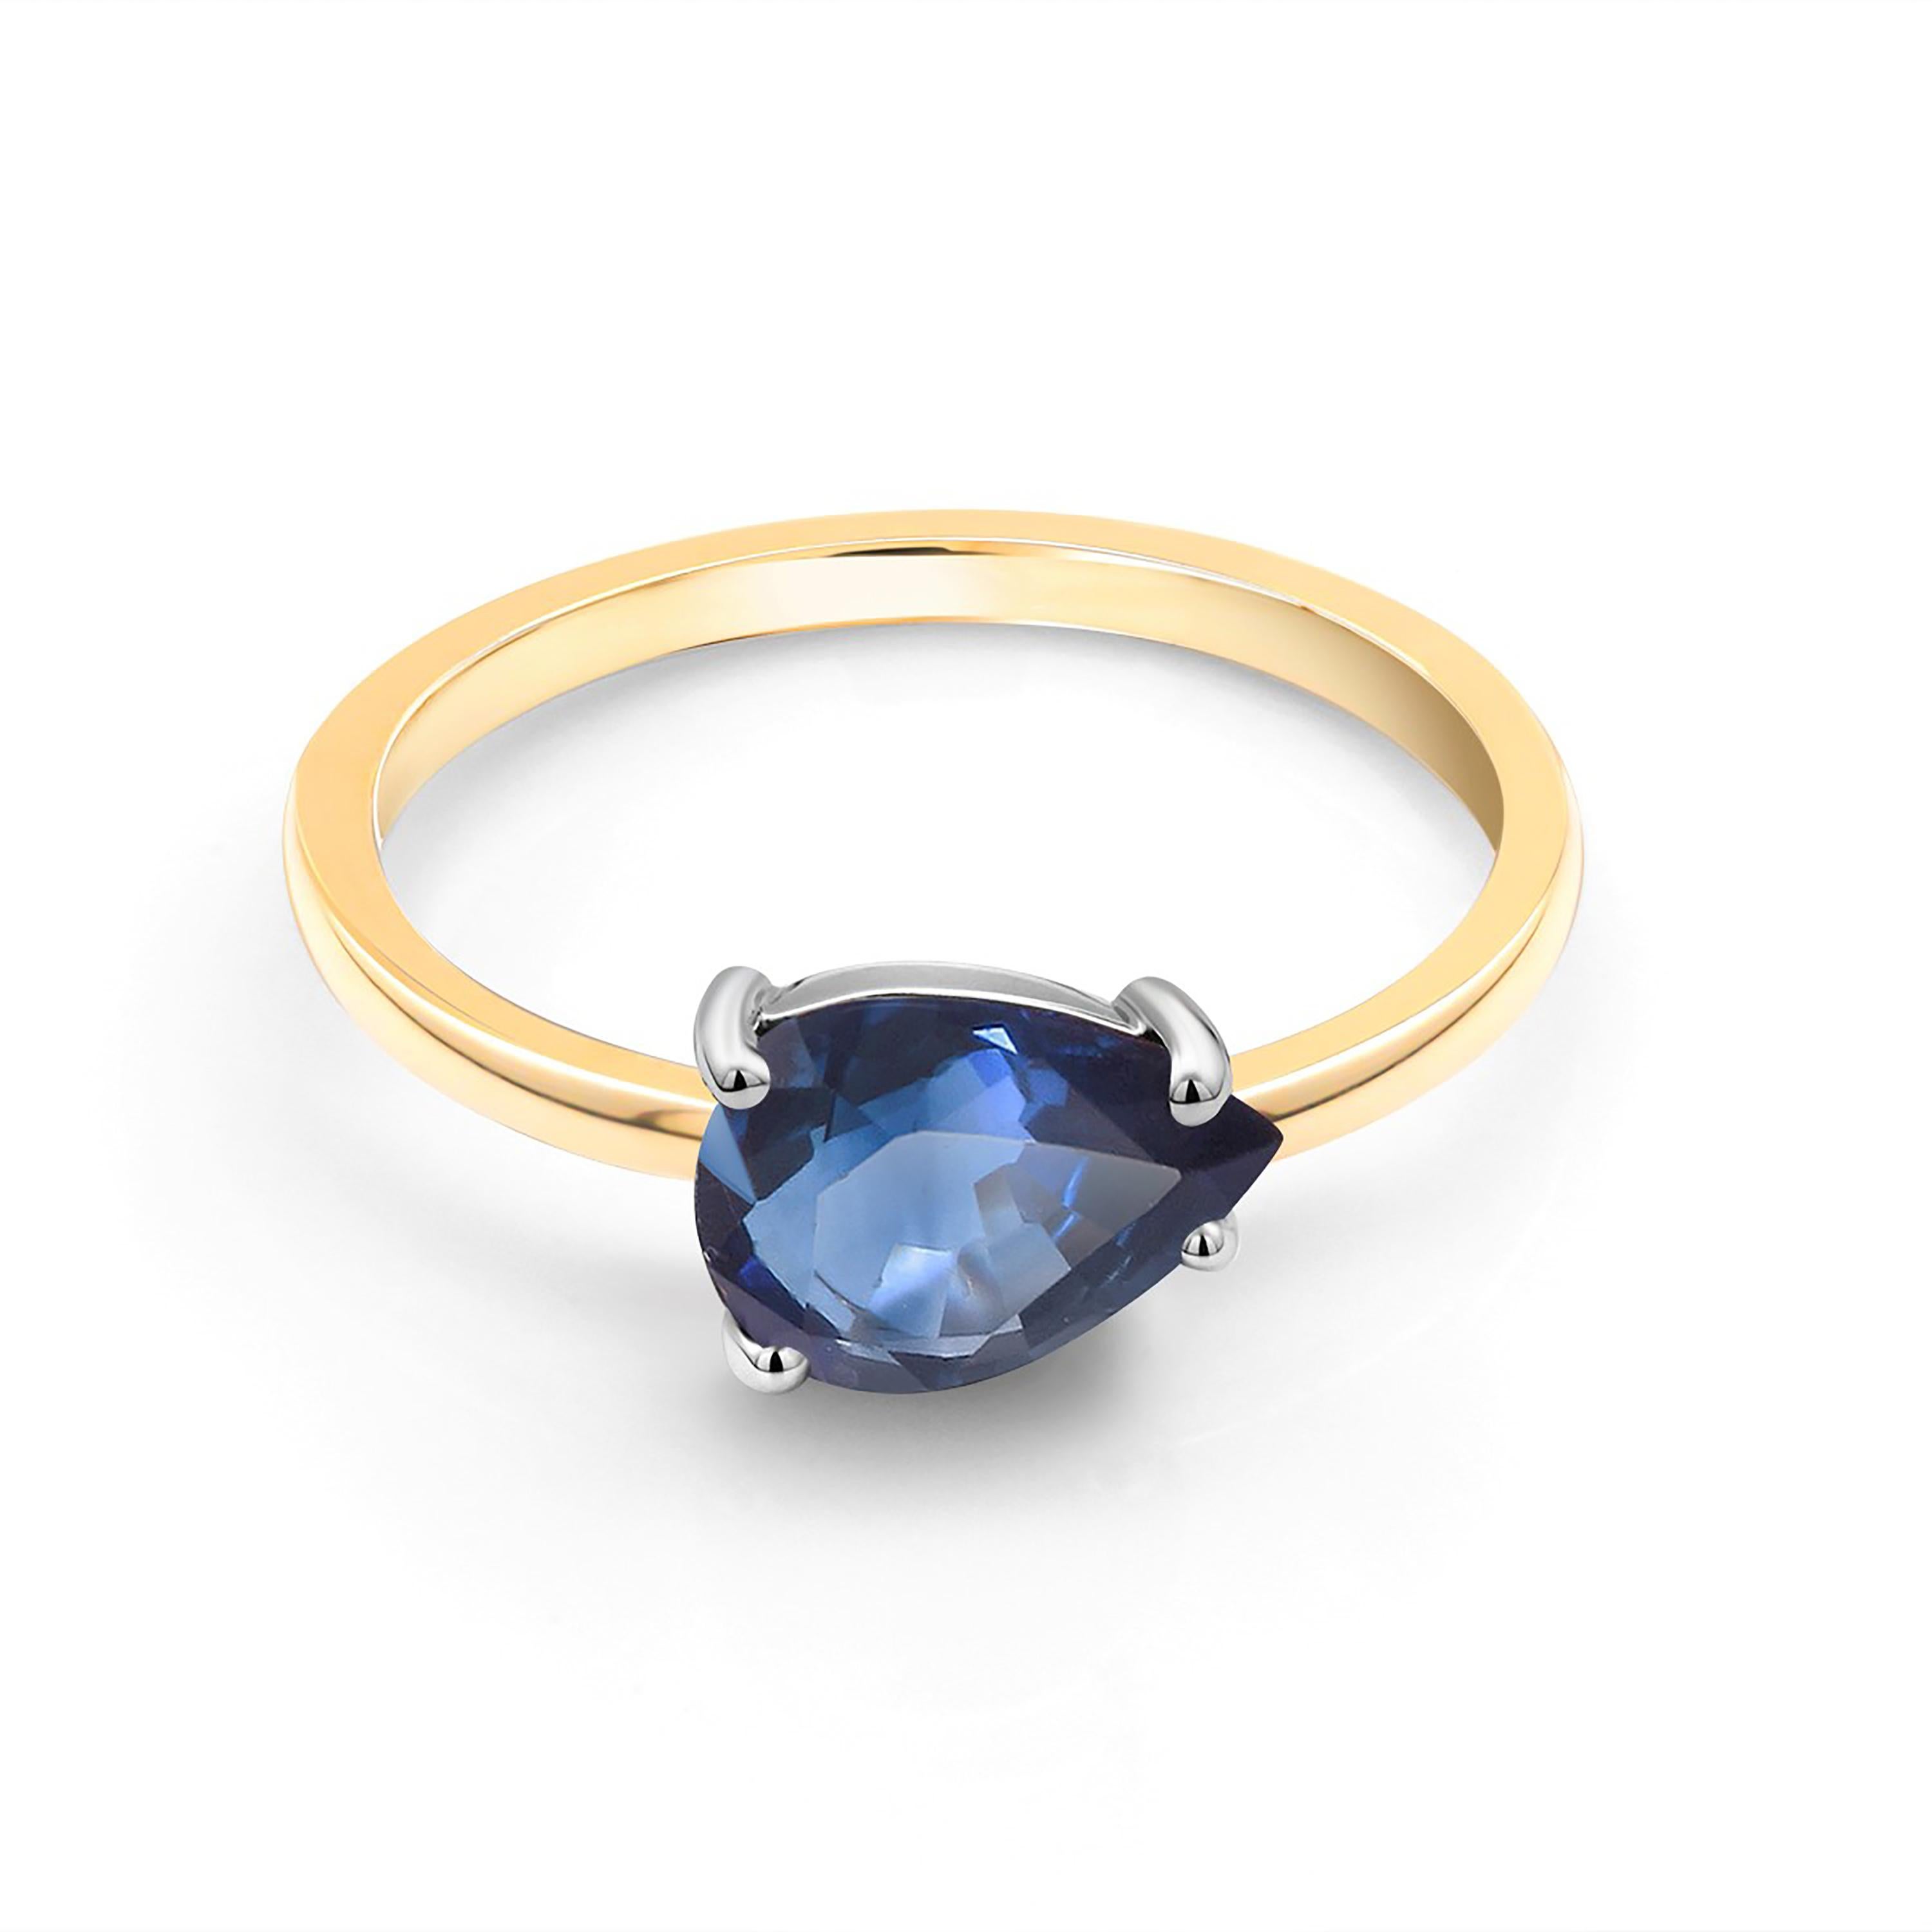 Fourteen karats white and yellow gold cocktail ring
Bright and brilliant pear-shaped blue sapphire weighing 2.20 carats      
Sapphire hue color is of royal blue tone                                                                 
Ring size 7 In